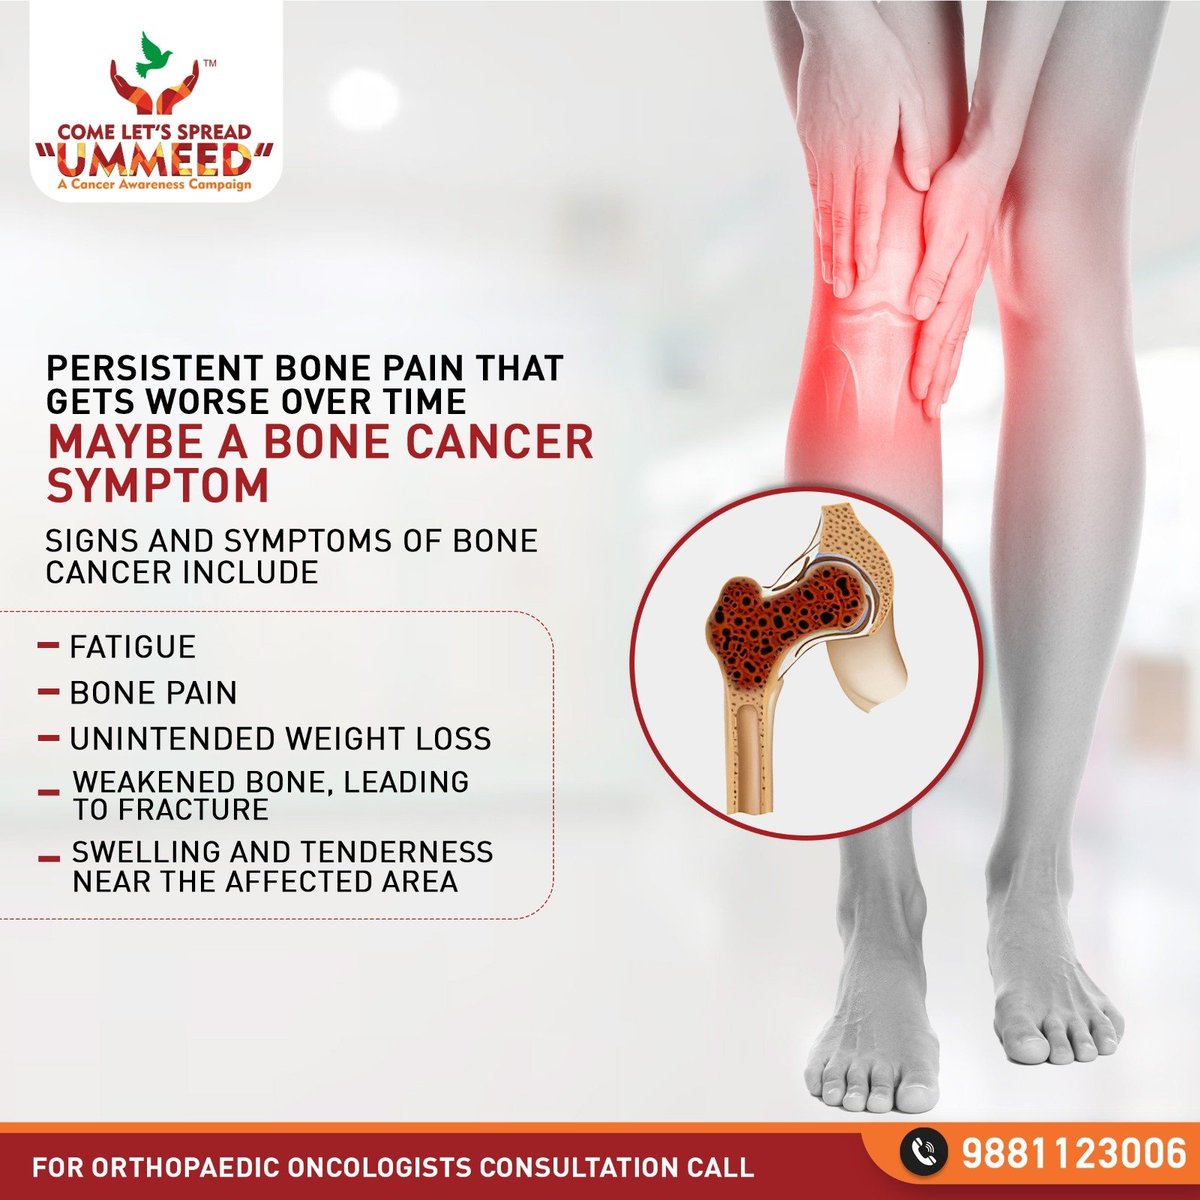 Bone pain could be a sign of more serious issues. Stay informed and vigilant about bone cancer symptoms.

To Book an Onco Orthopaedic consultation, call us at 9881123006

#ABMH #ummeed #adityabirlamemoriahospital #orthopedic #sportsinjury #bonecancer #hospital